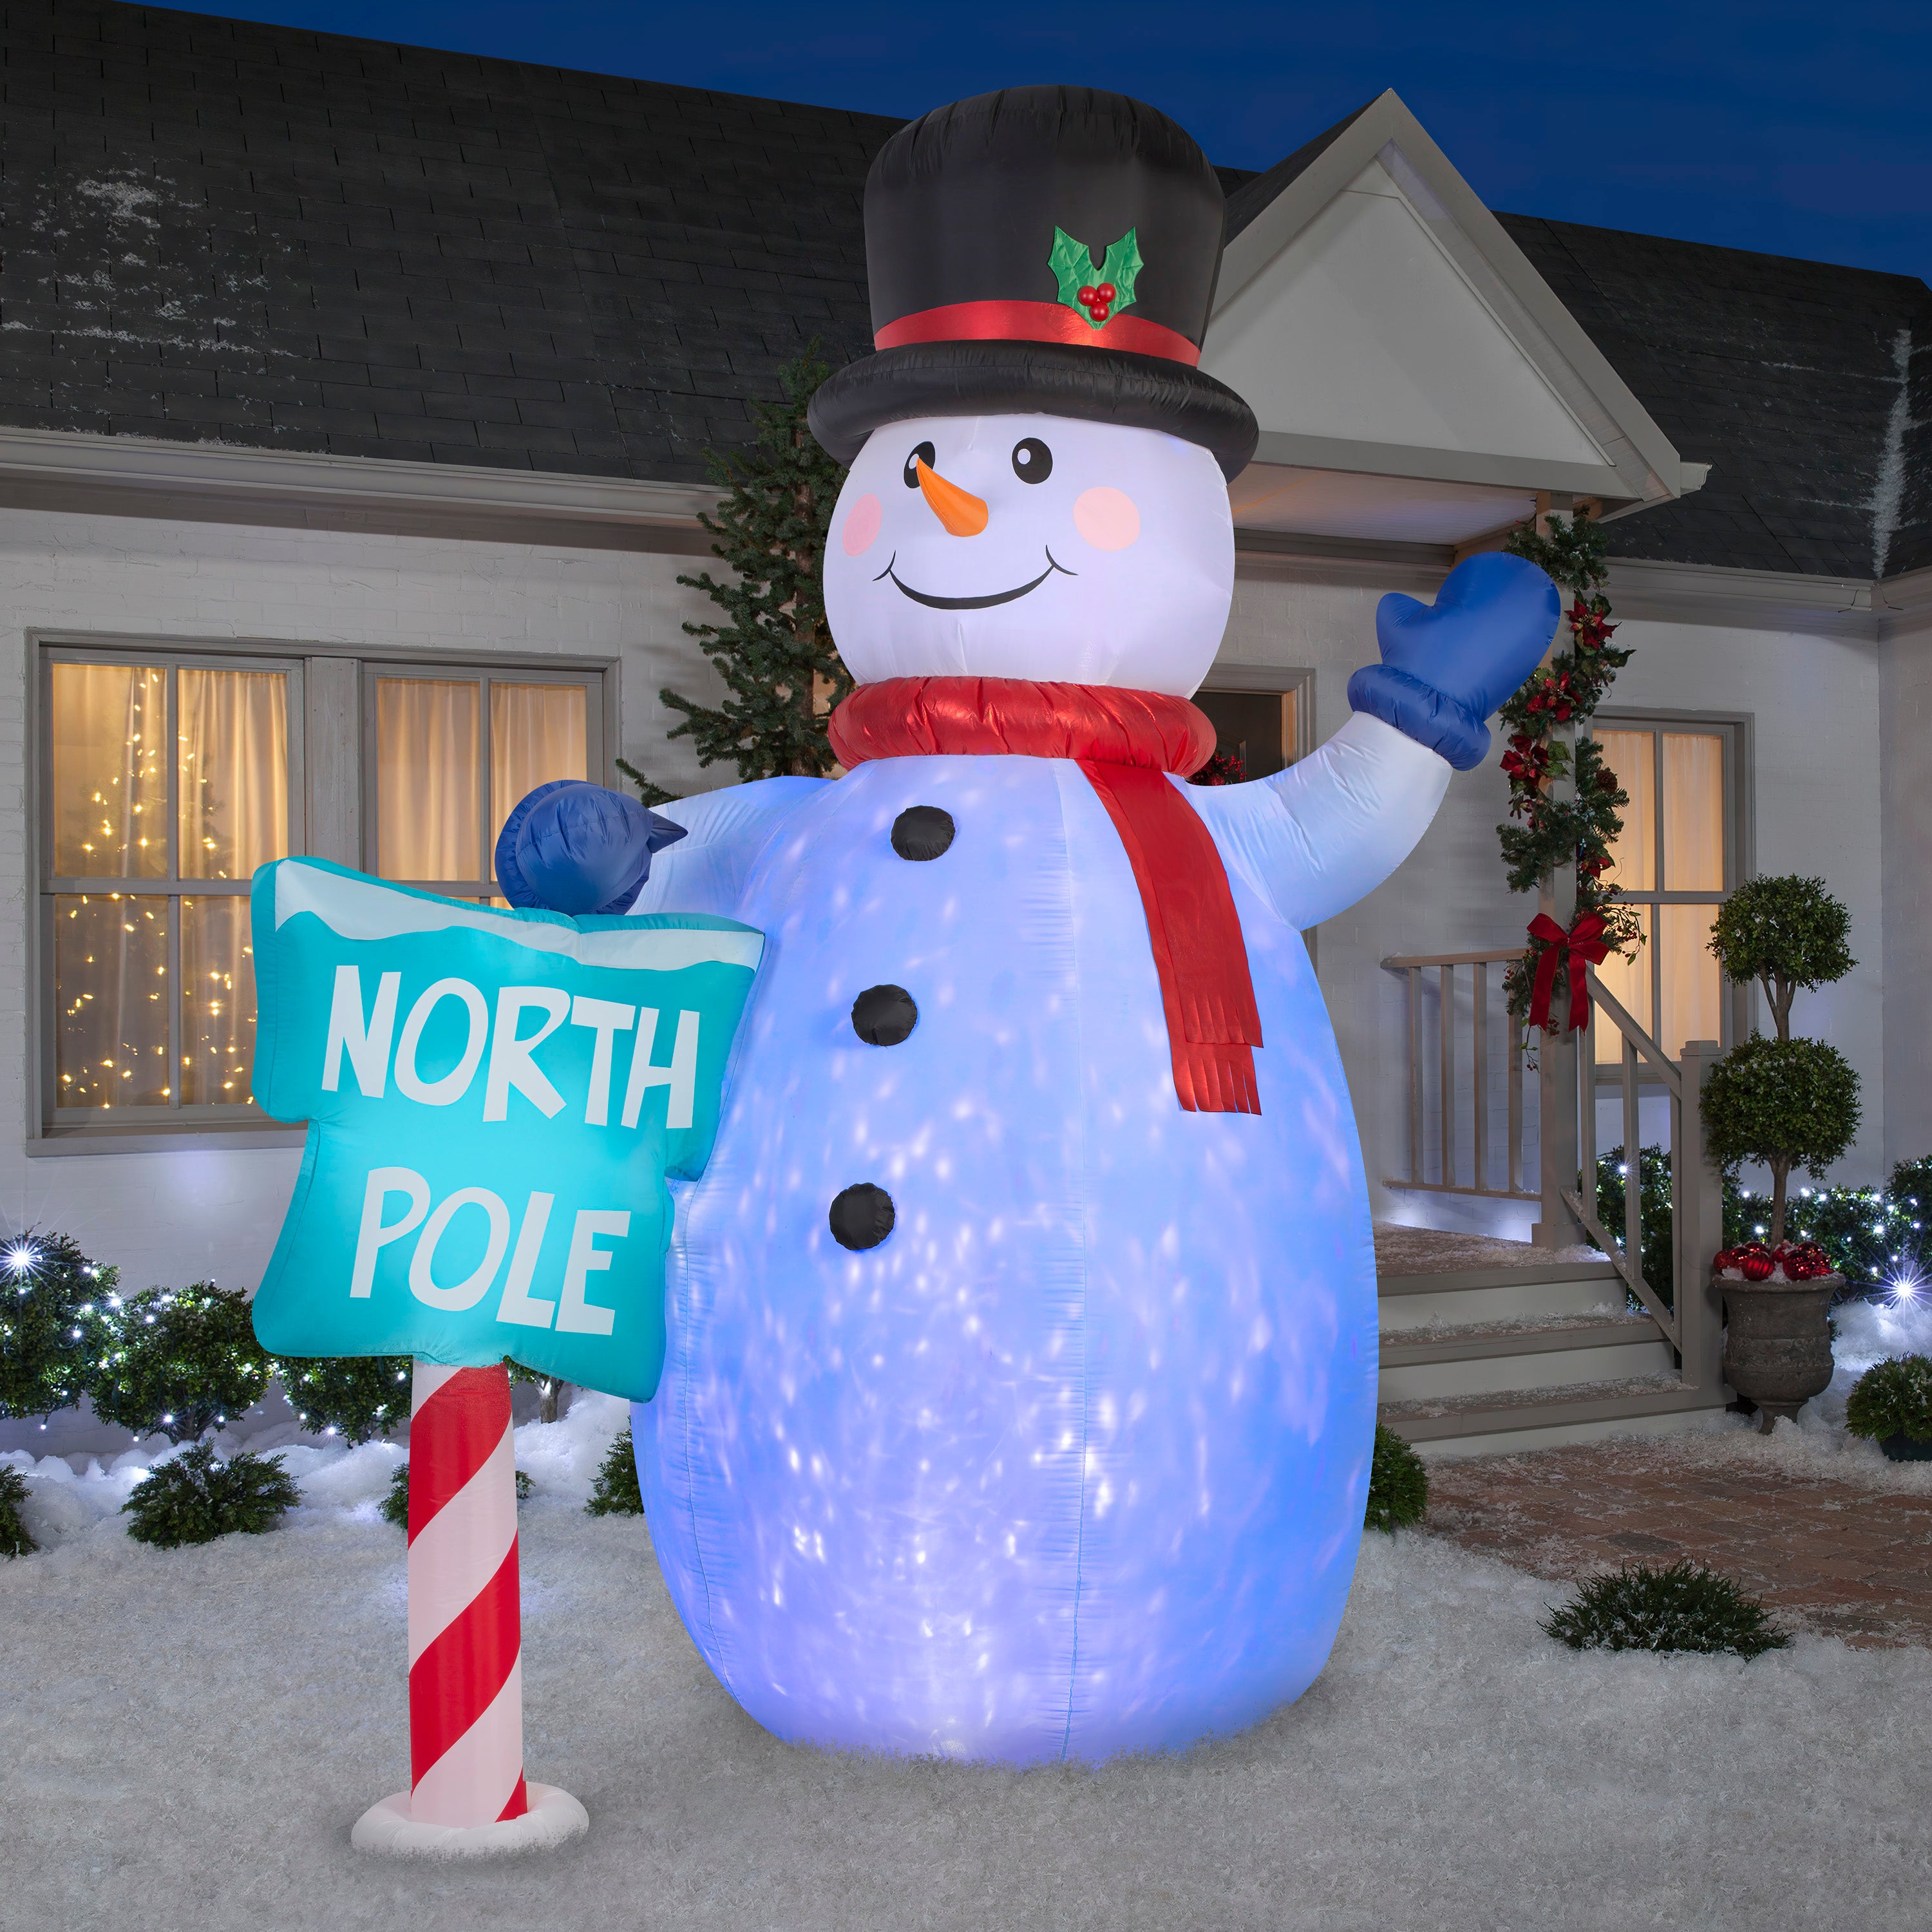 10' Projection Airblown Giant Kaleidoscope Snowman Christmas Inflatabl ...